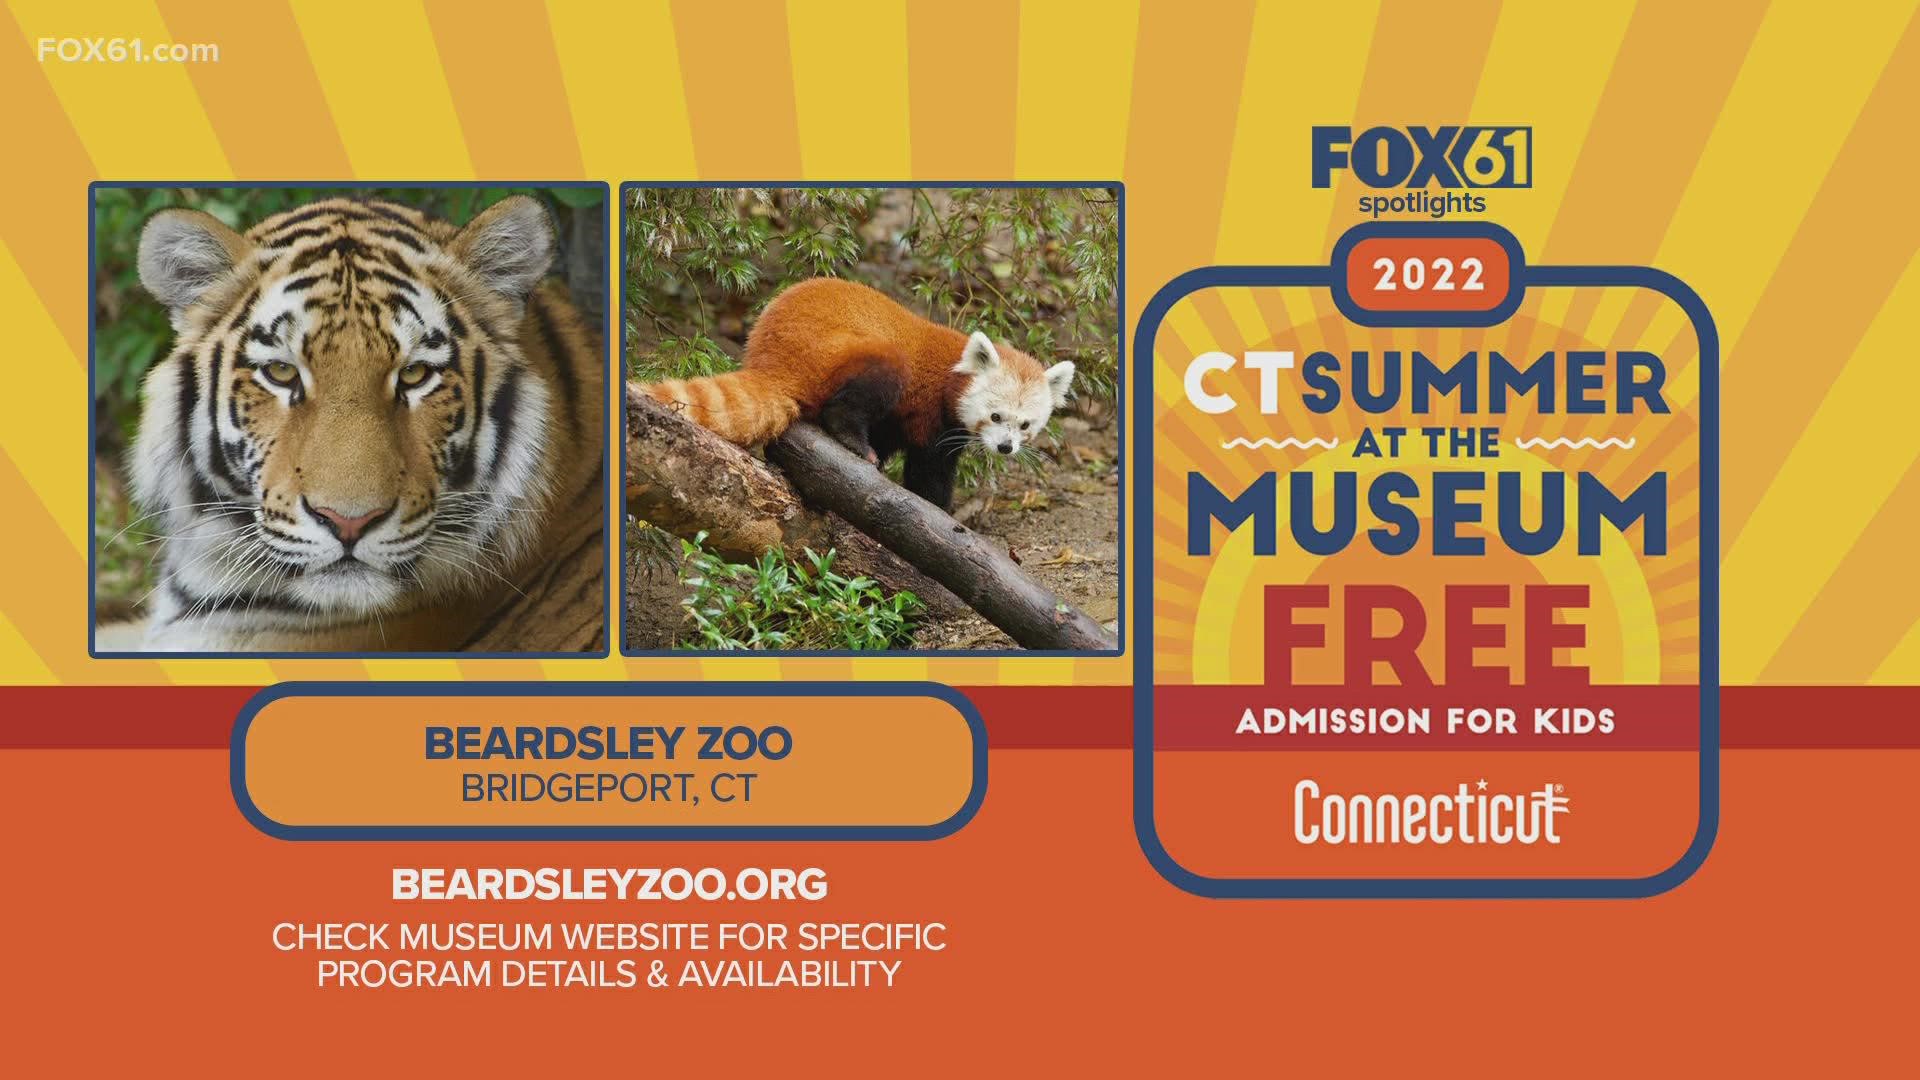 Kids 18 and under can visit the Beardsley Zoo in Bridgeport for free with an adult who is a resident of Connecticut. It runs through Sept. 5.